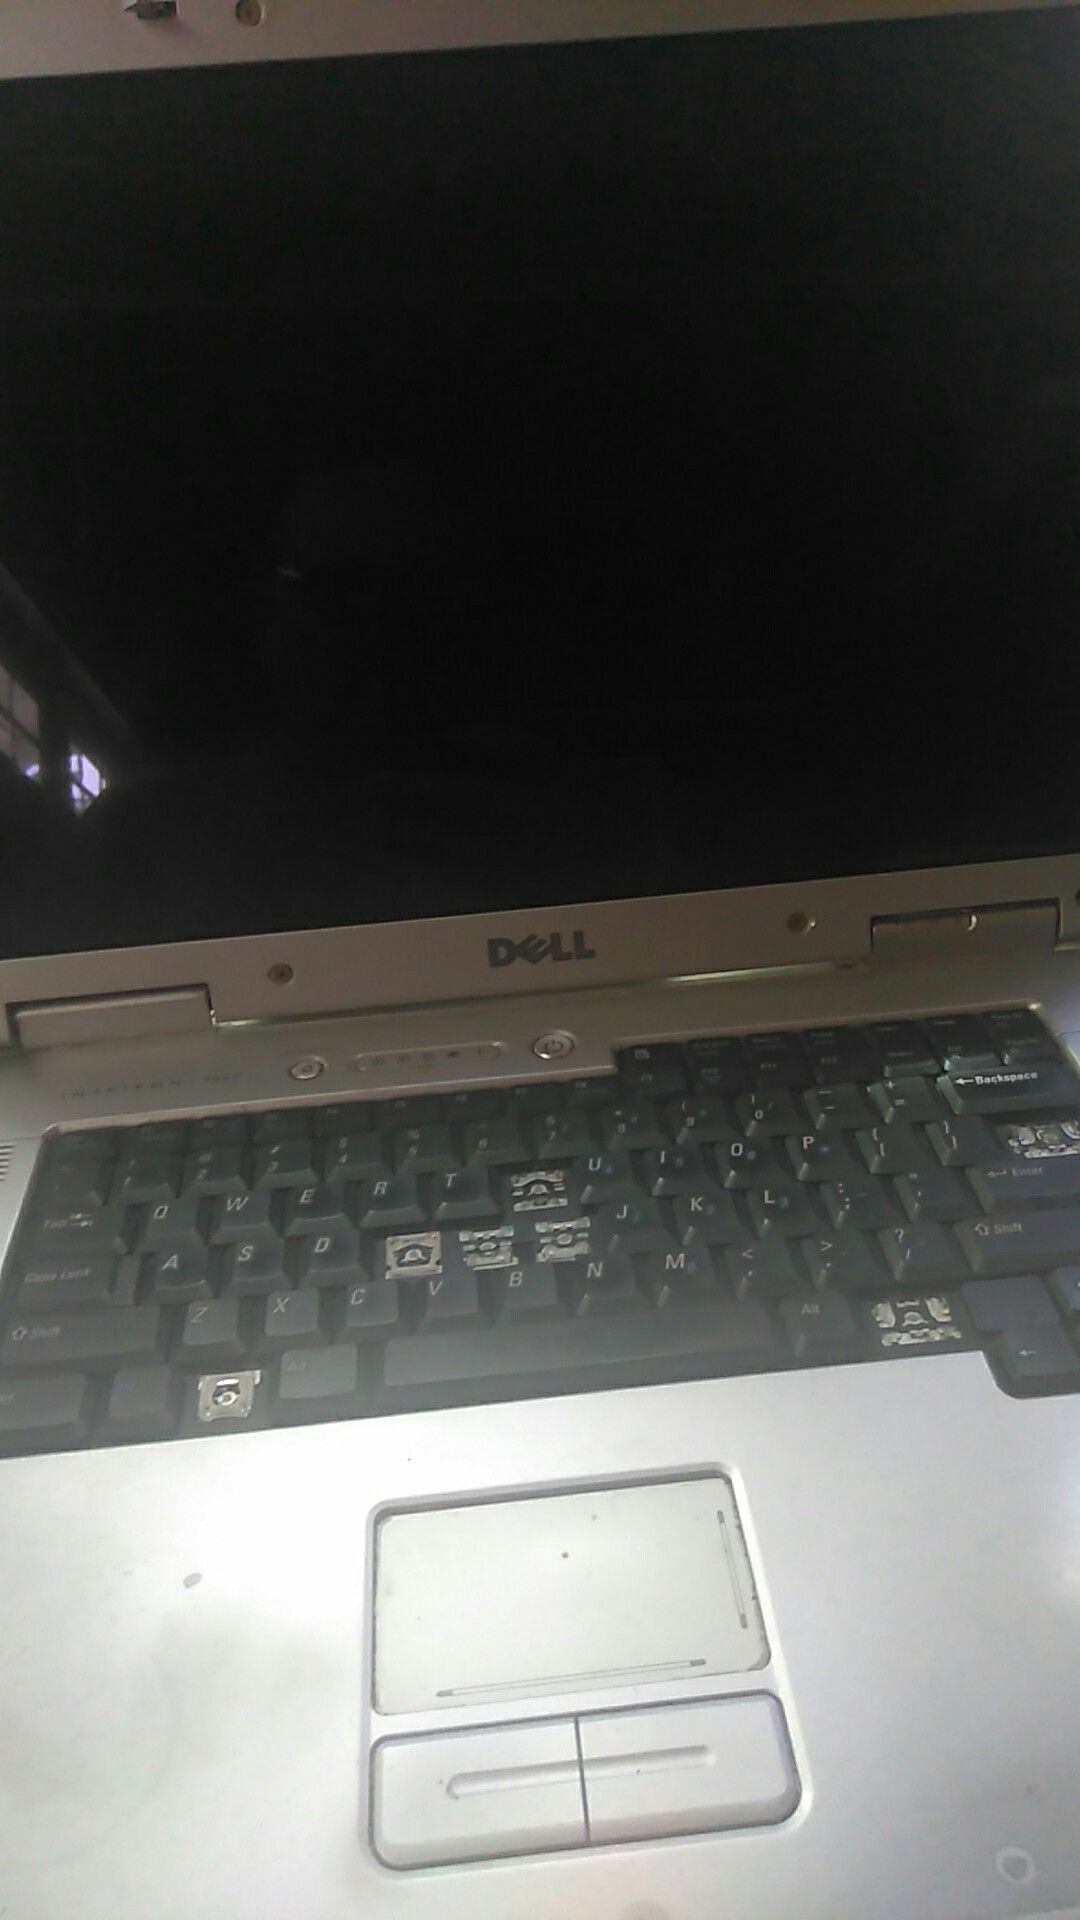 Dell 17 monitor not working. Need some work